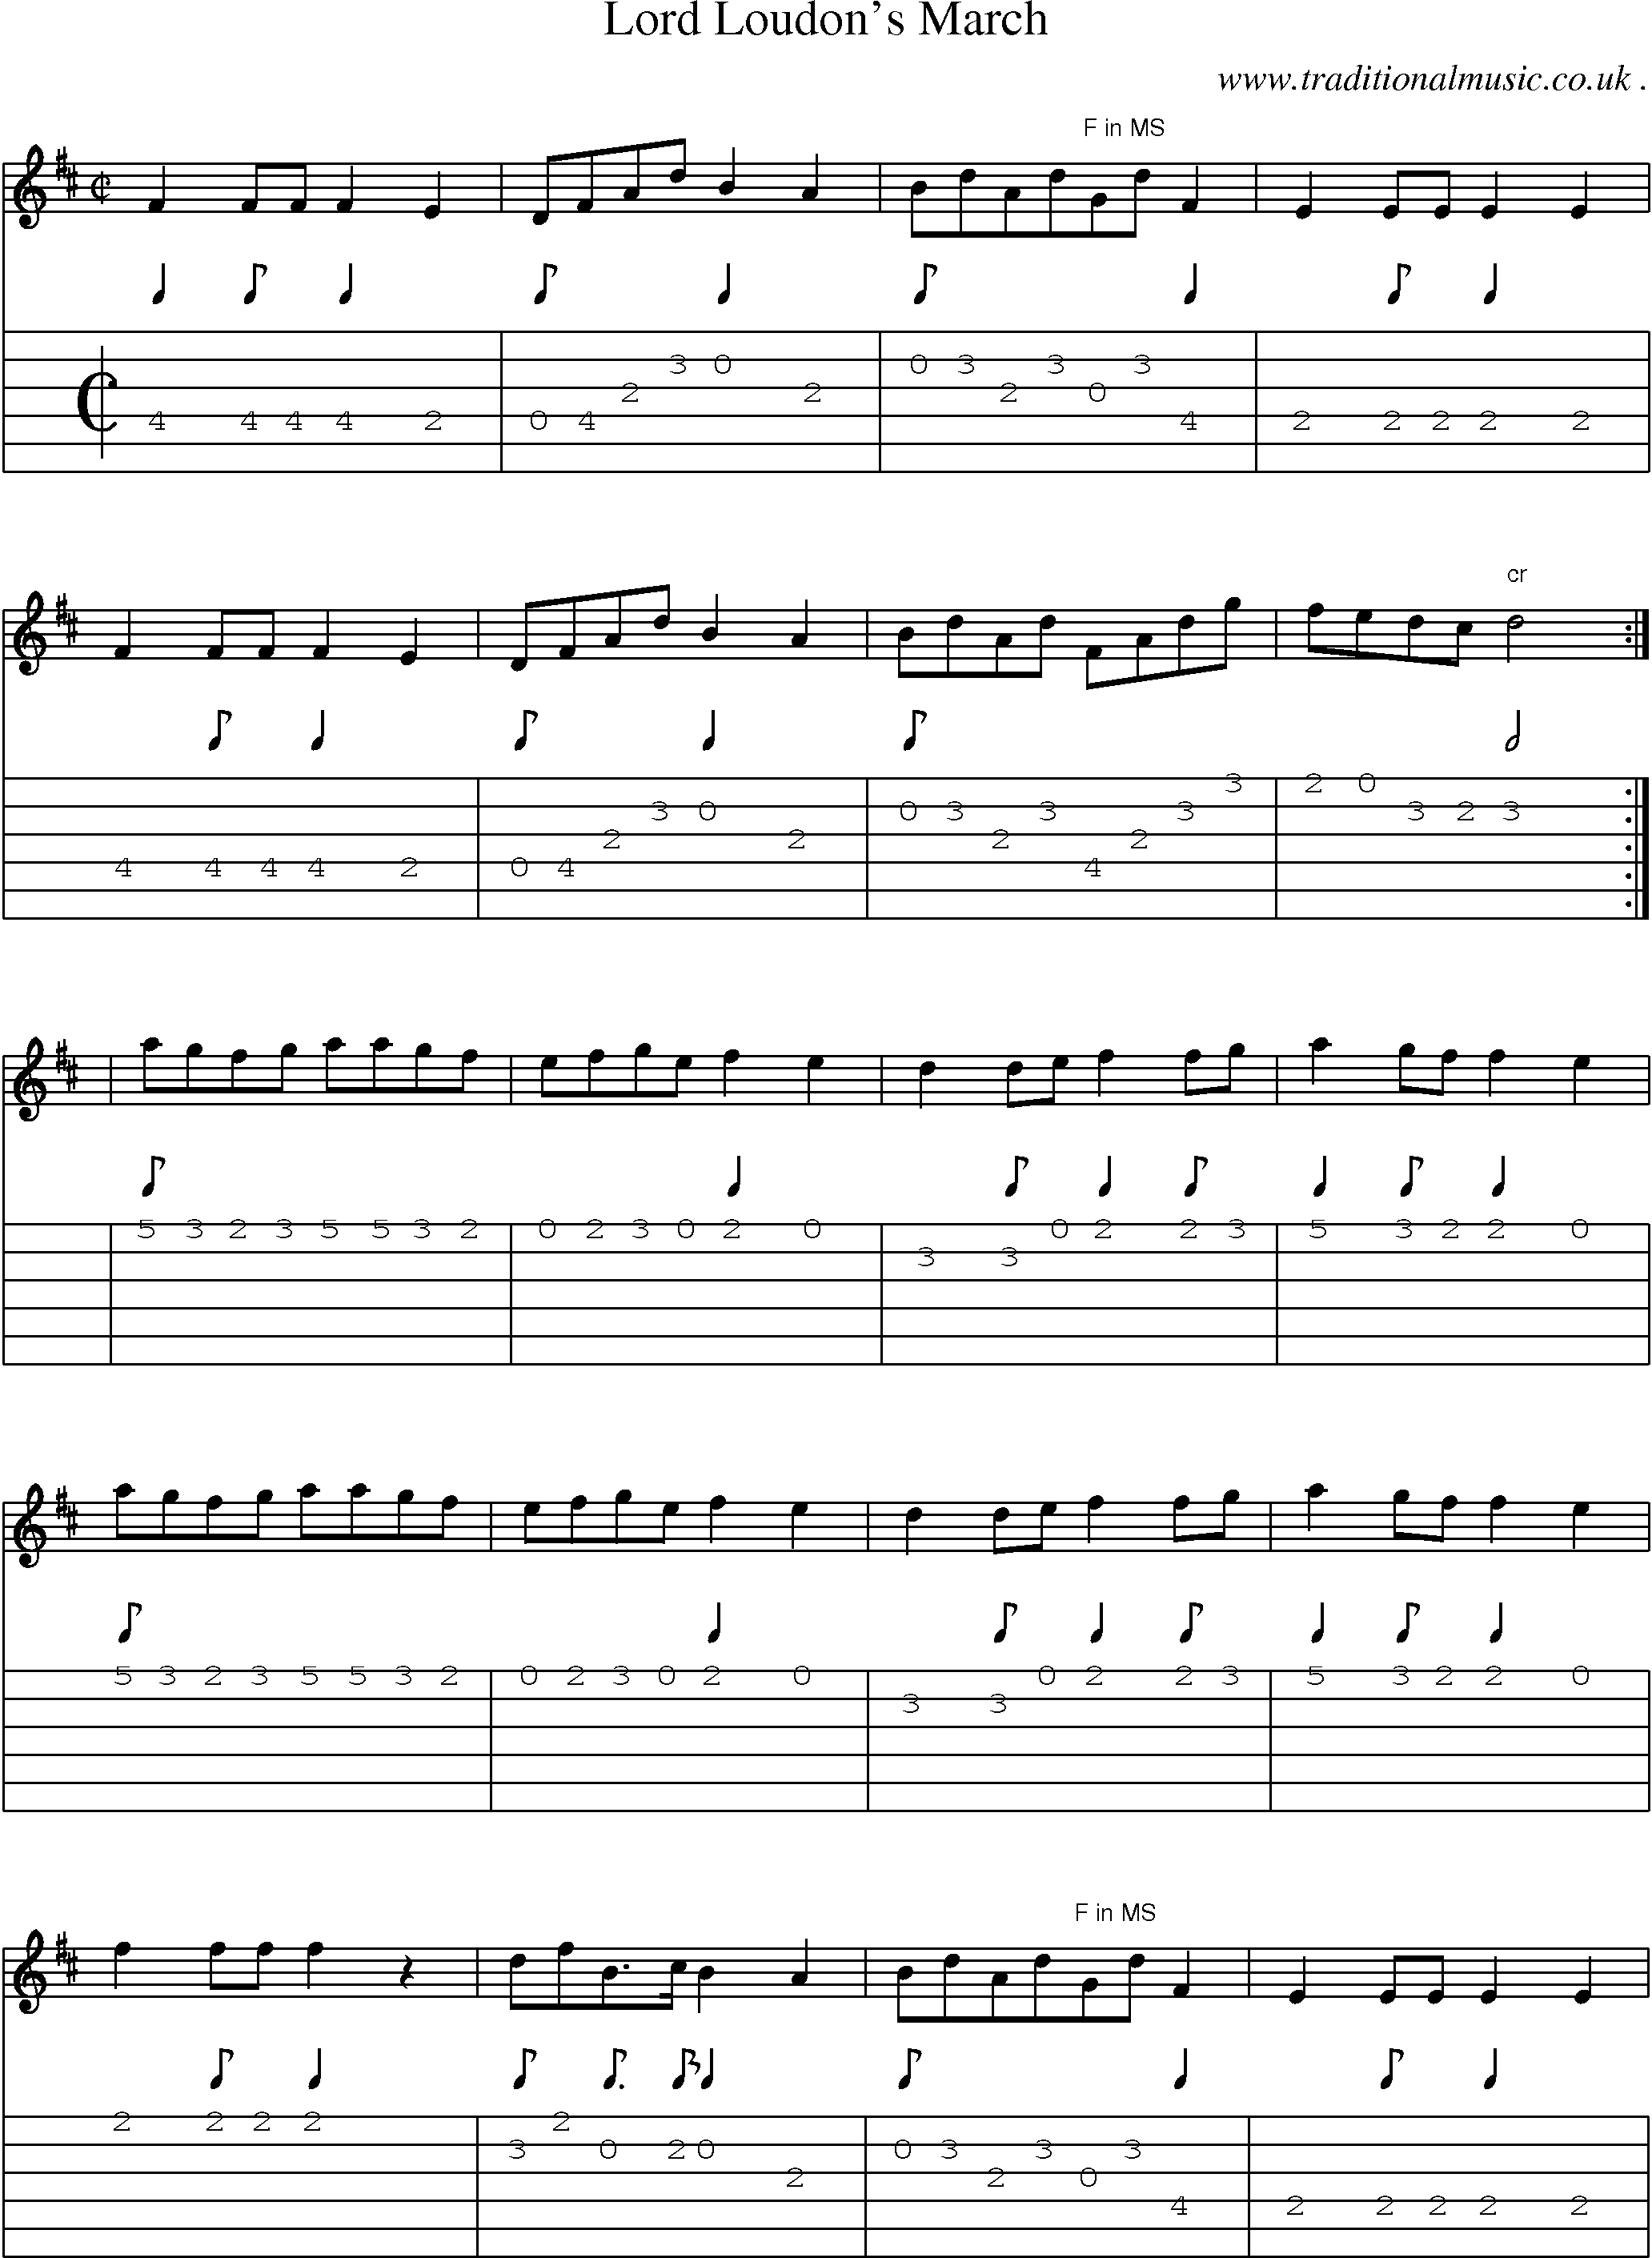 Sheet-Music and Guitar Tabs for Lord Loudons March